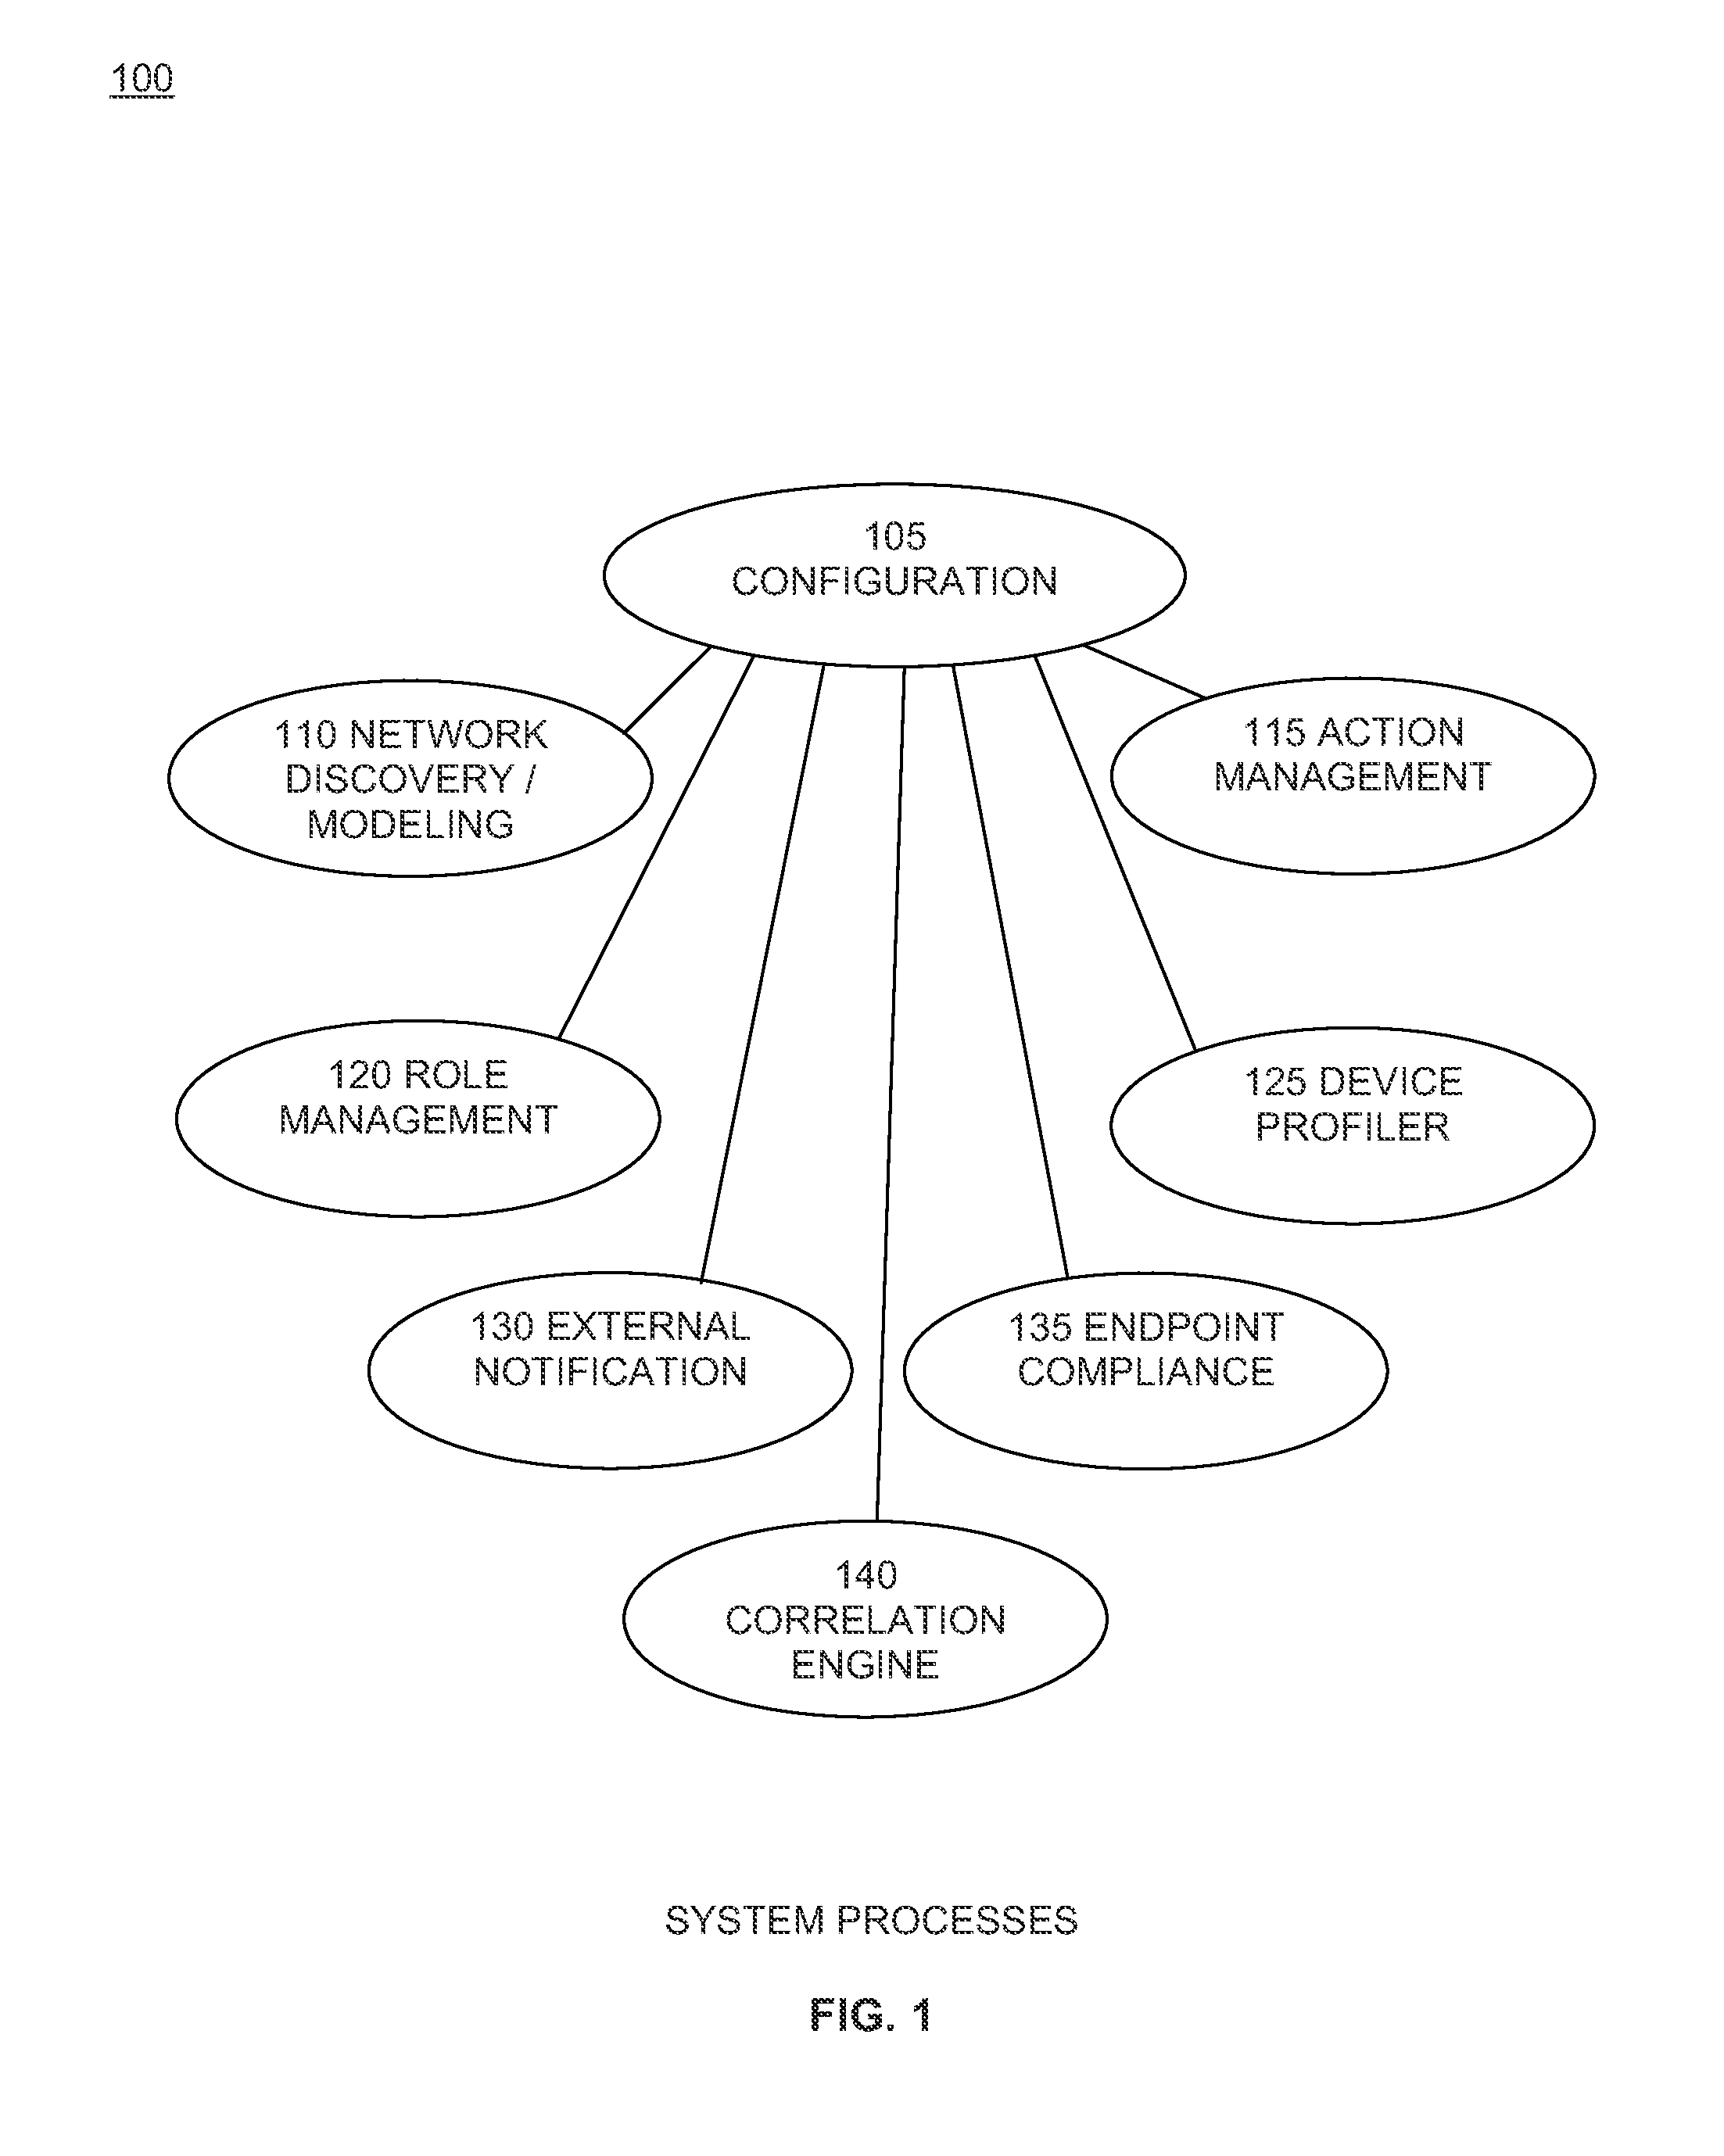 Automated configuration of network devices administered by policy enforcement